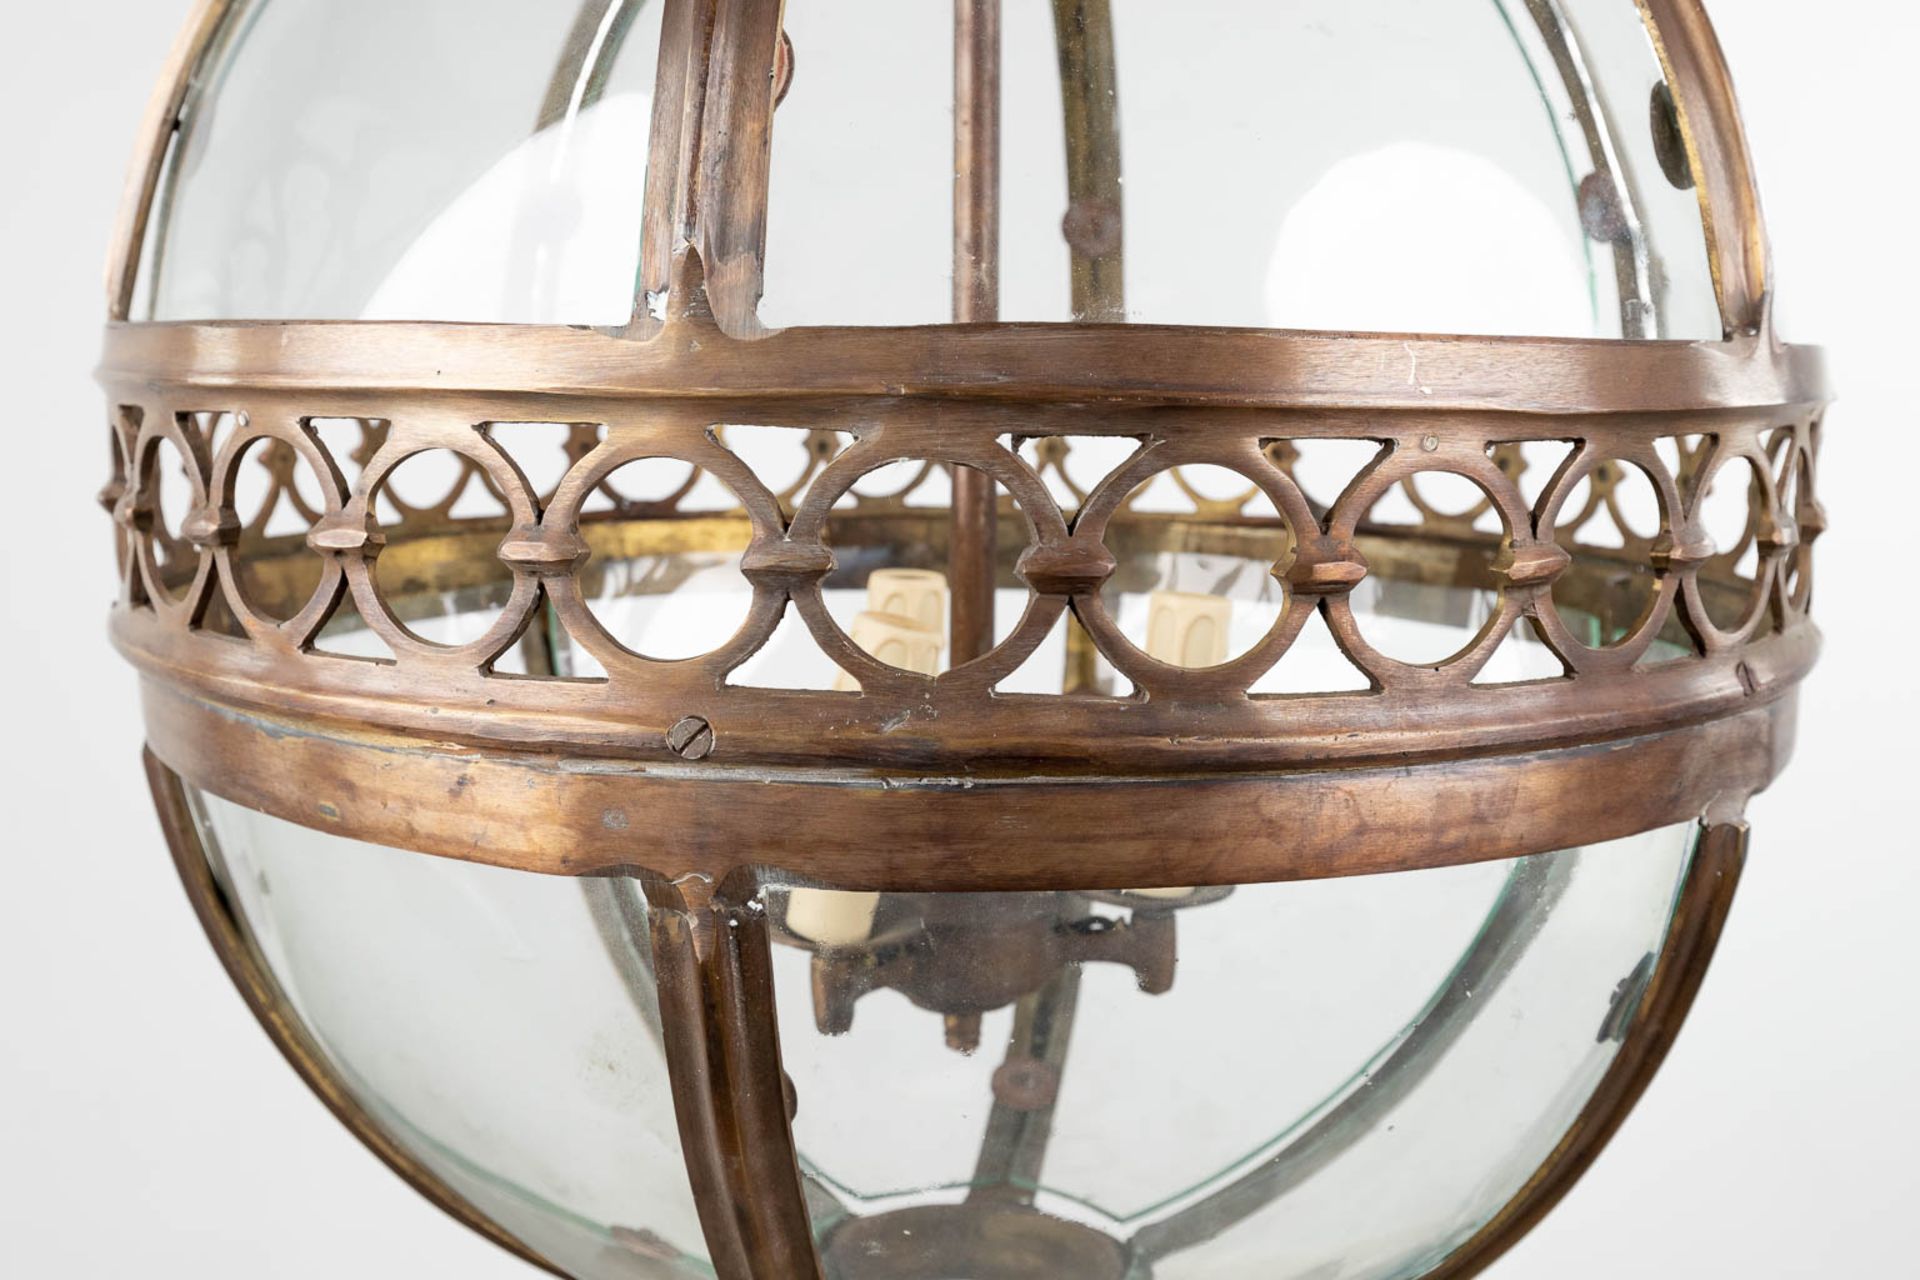 A lantern in the shape of a ball, made of glass and brass. 20th C. (H:70 x D:56 cm) - Image 4 of 12